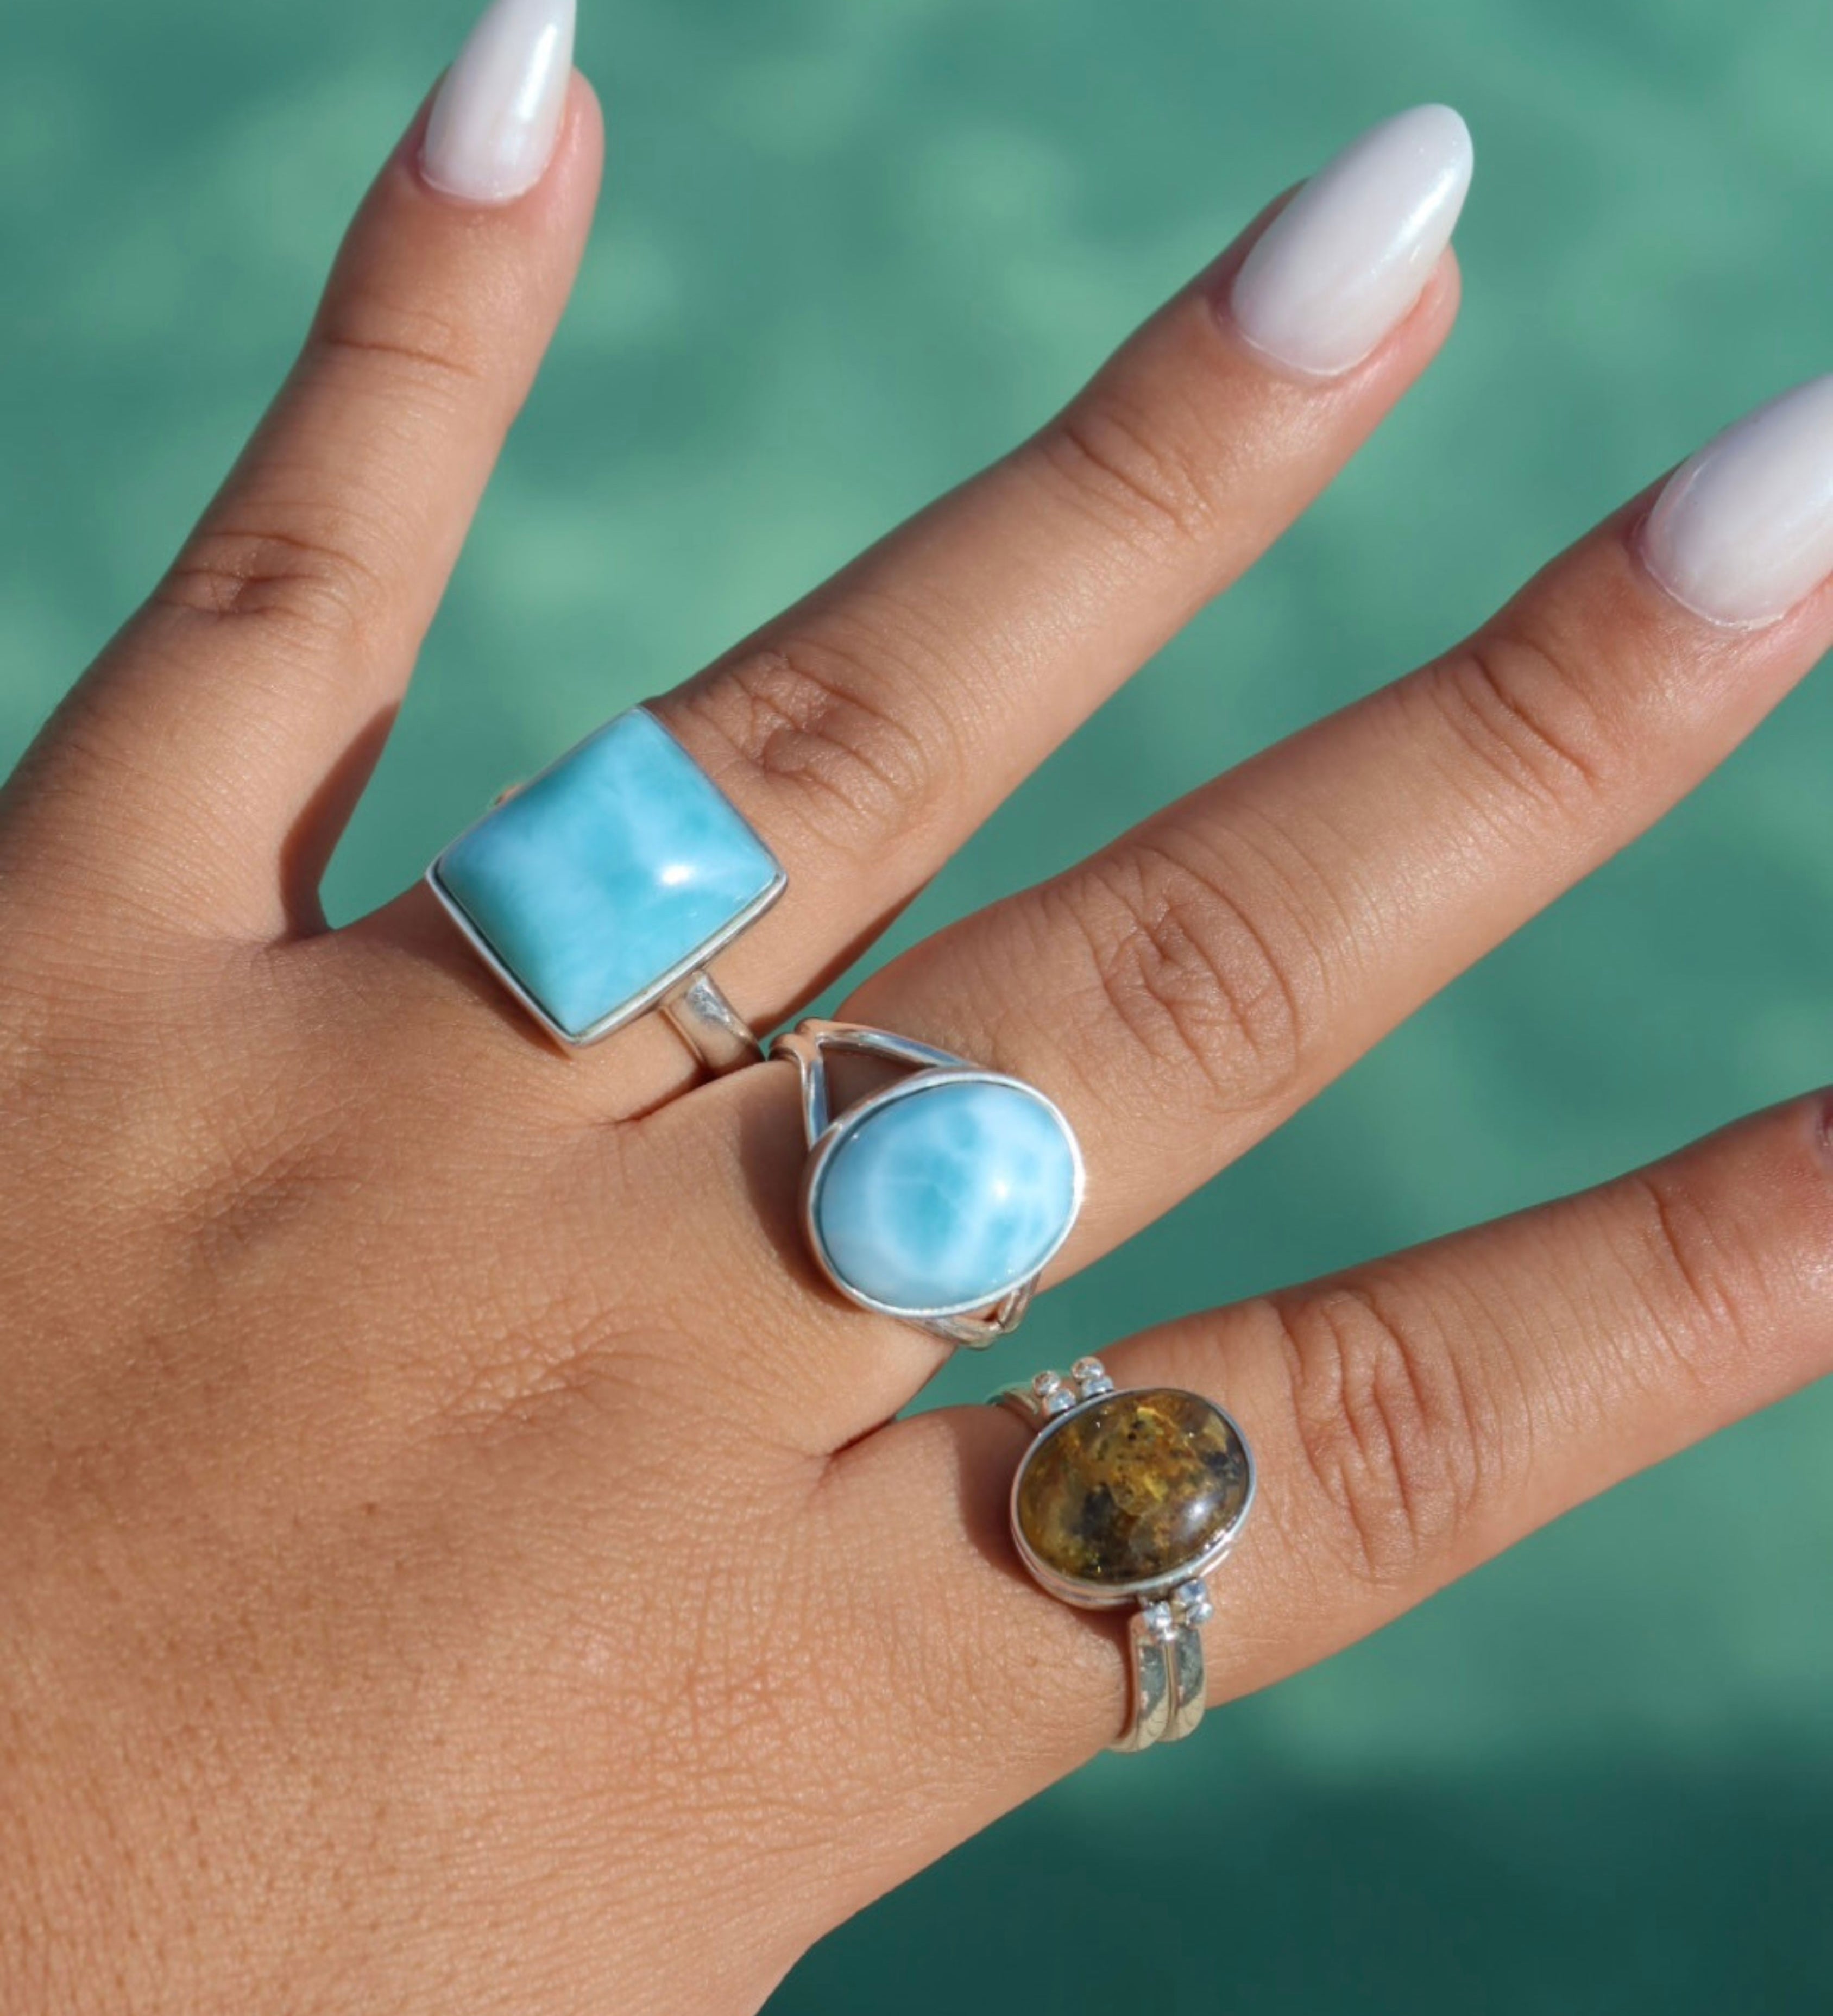 Assorted larimar rings displayed on a sandy beach, showcasing the unique blue hues and intricate designs of the gemstones against a natural coastal backdrop.